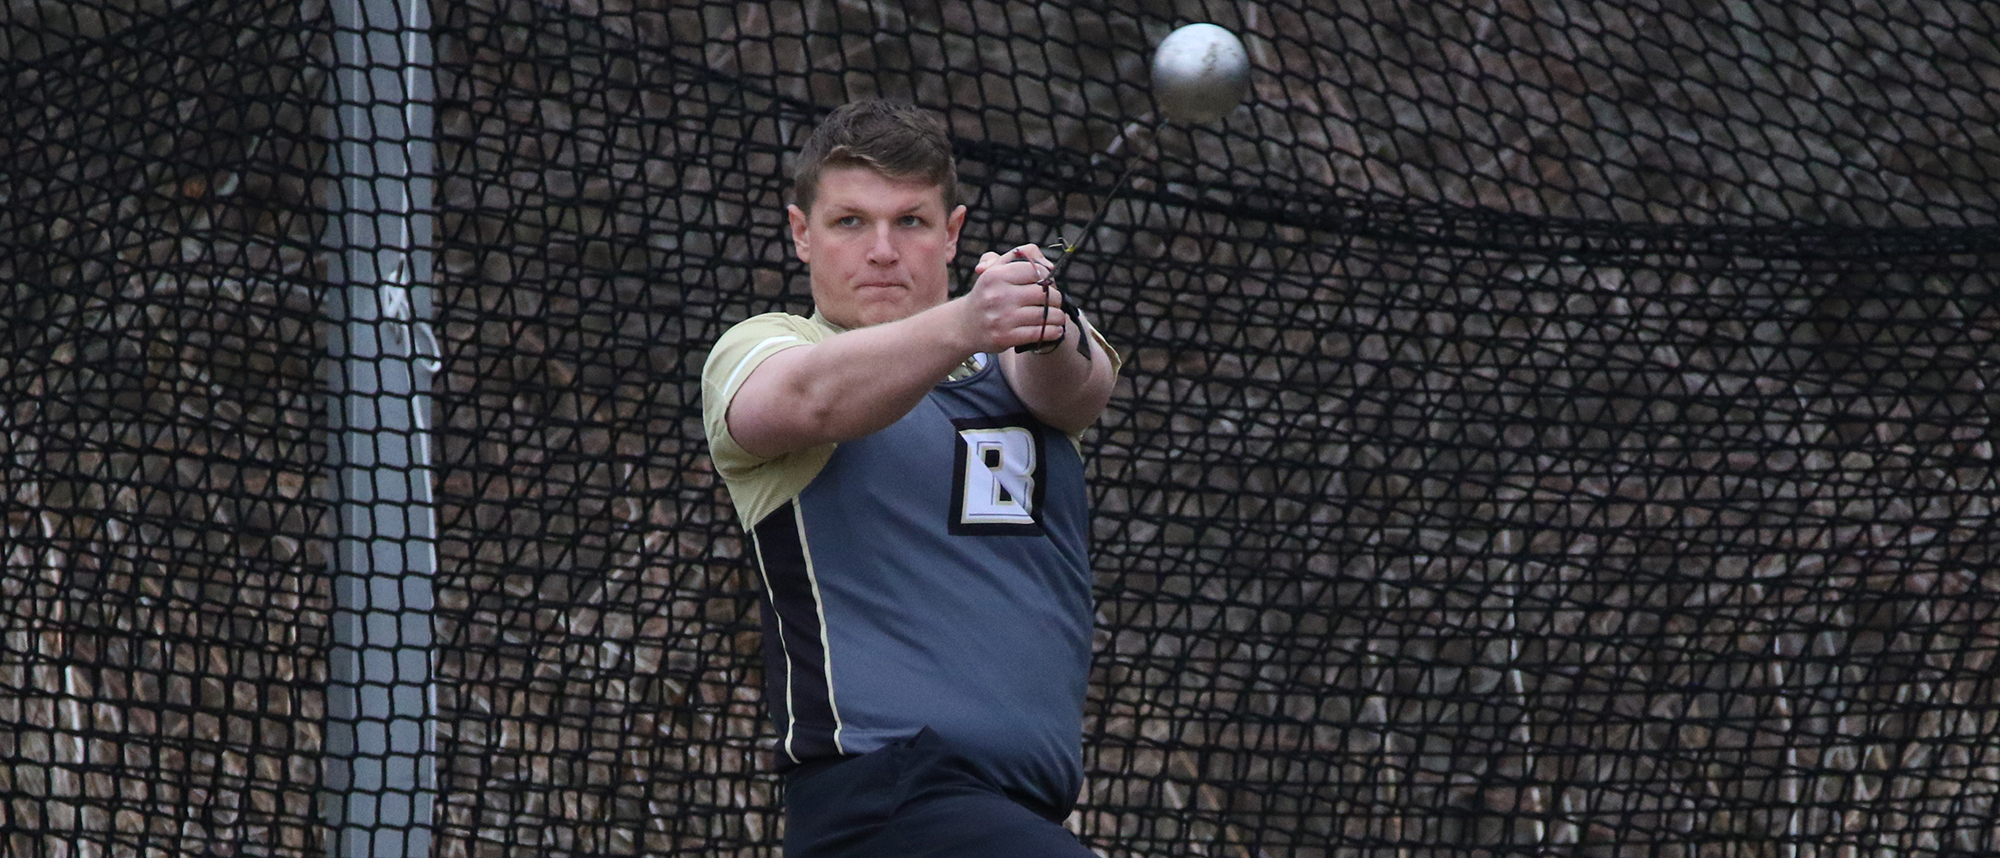 Bulldogs to host Indoor Throws Competition